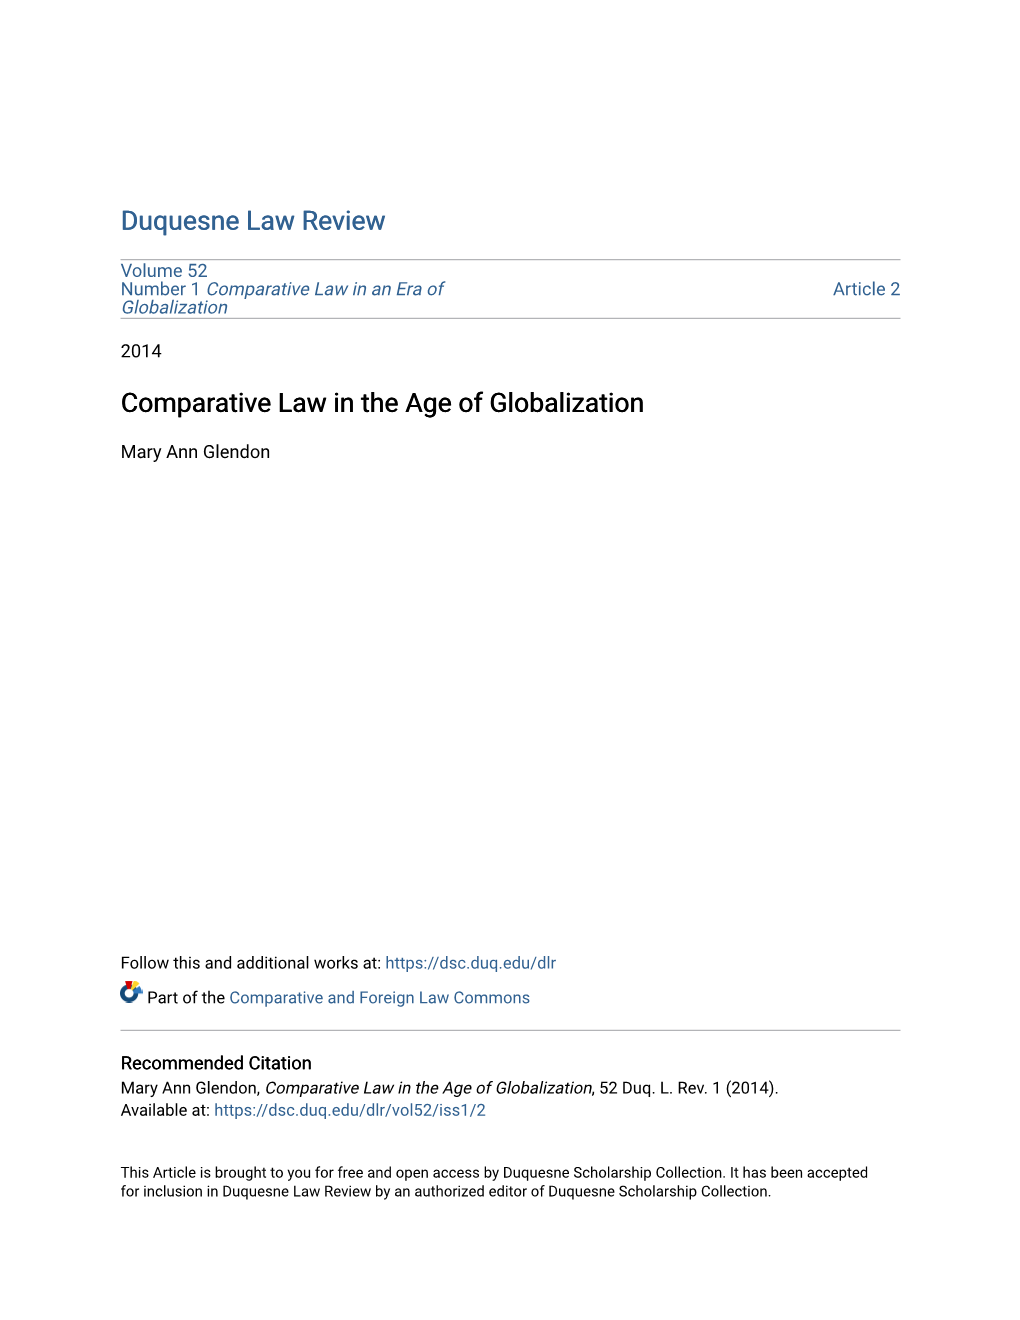 Comparative Law in the Age of Globalization